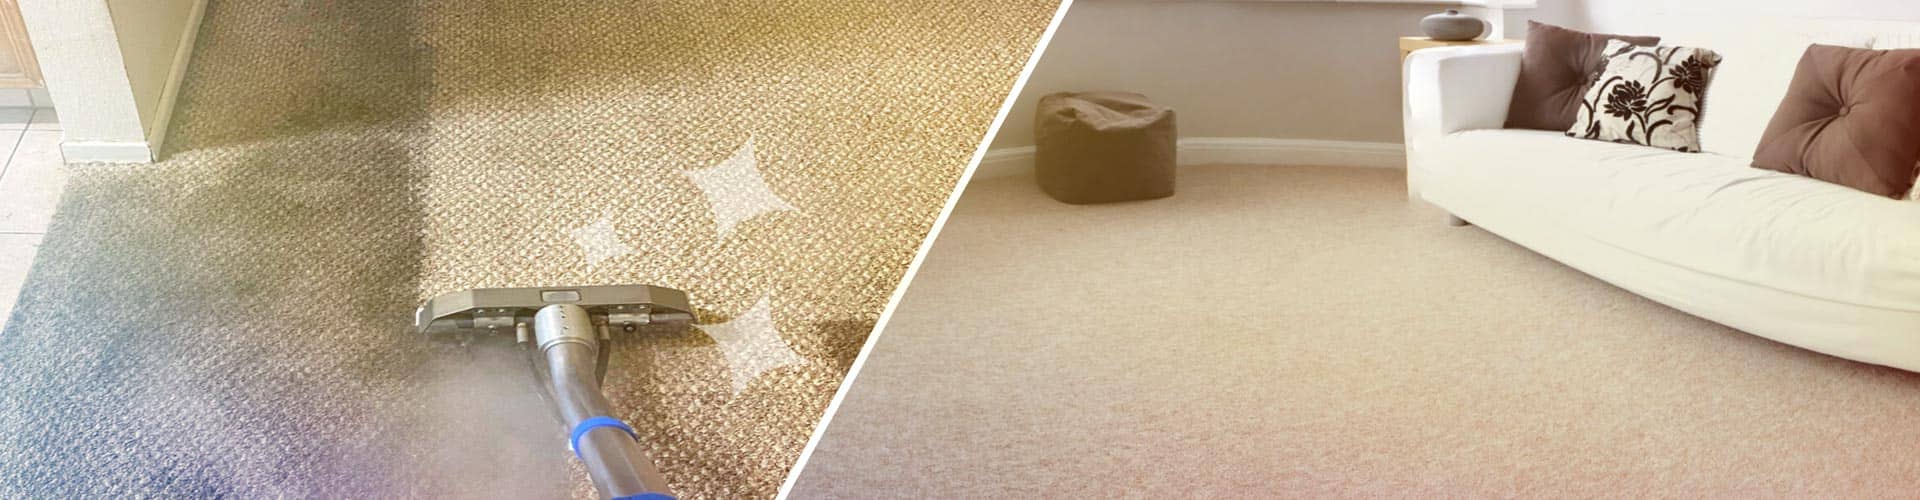 A Specializes Company in Carpet Cleaning